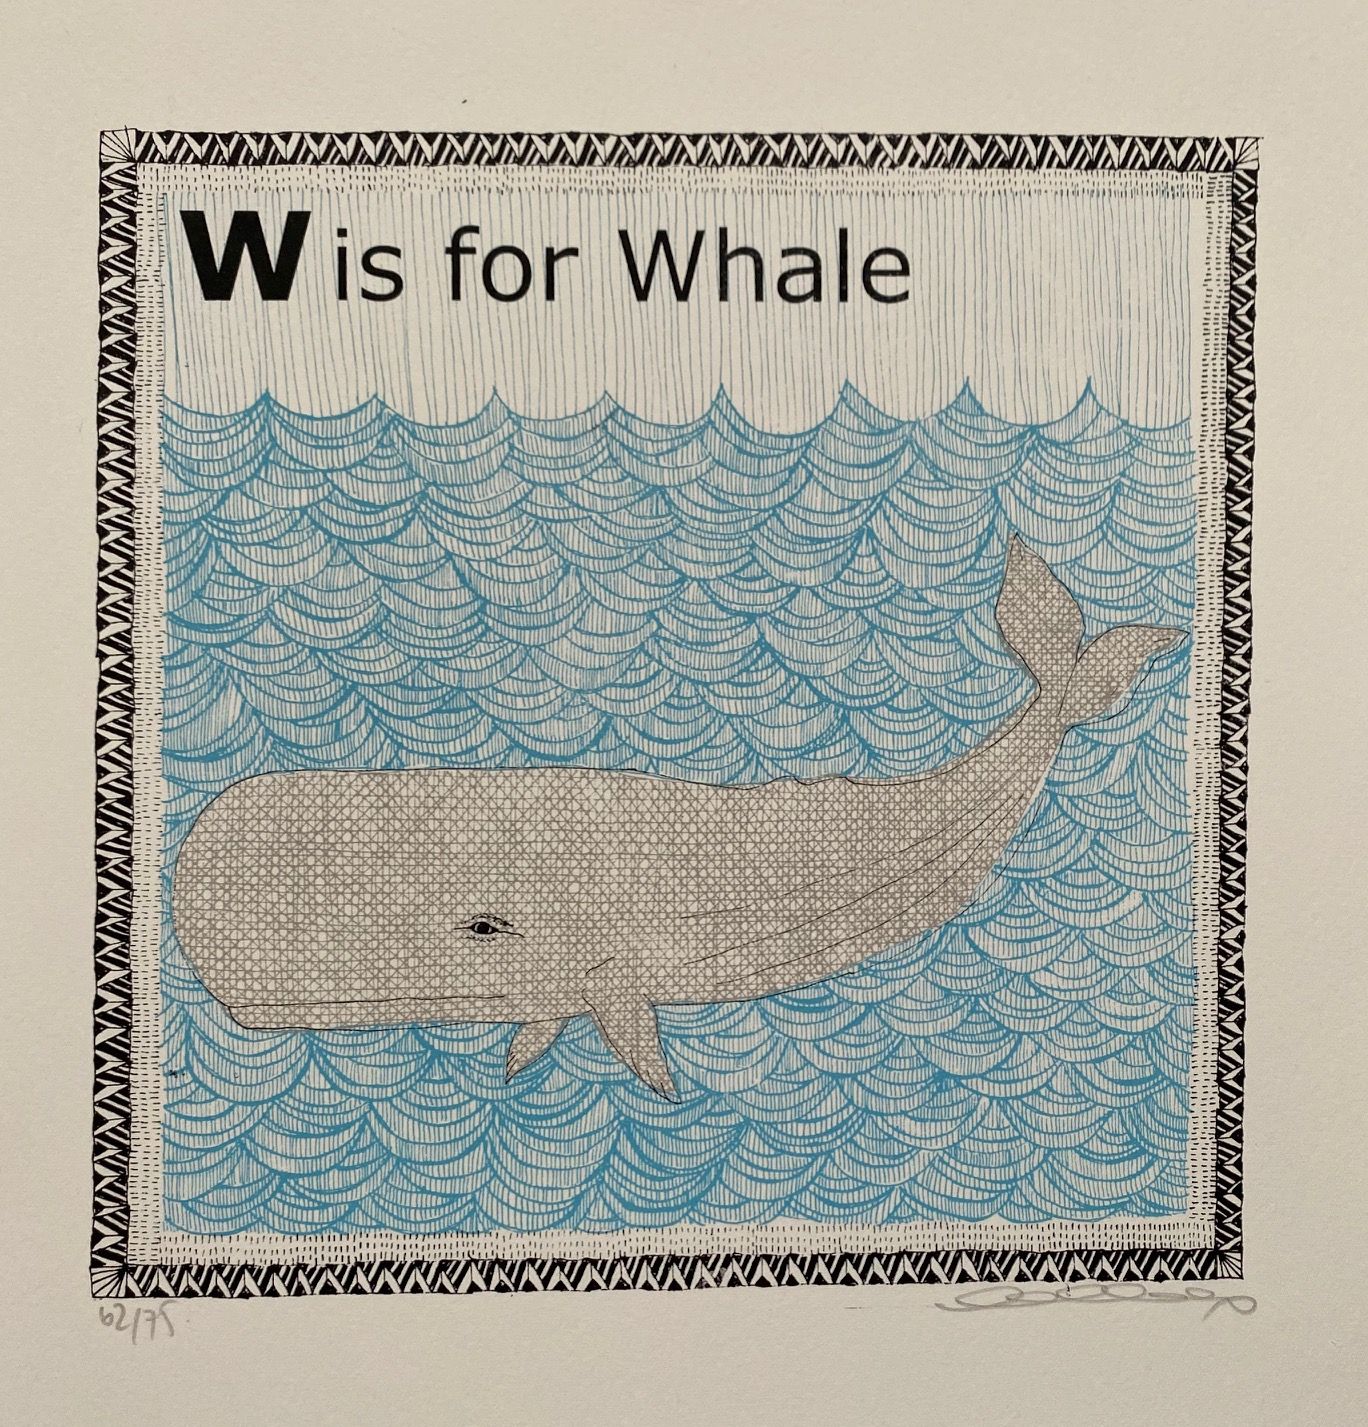 W is for Whale (small) by Clare Halifax